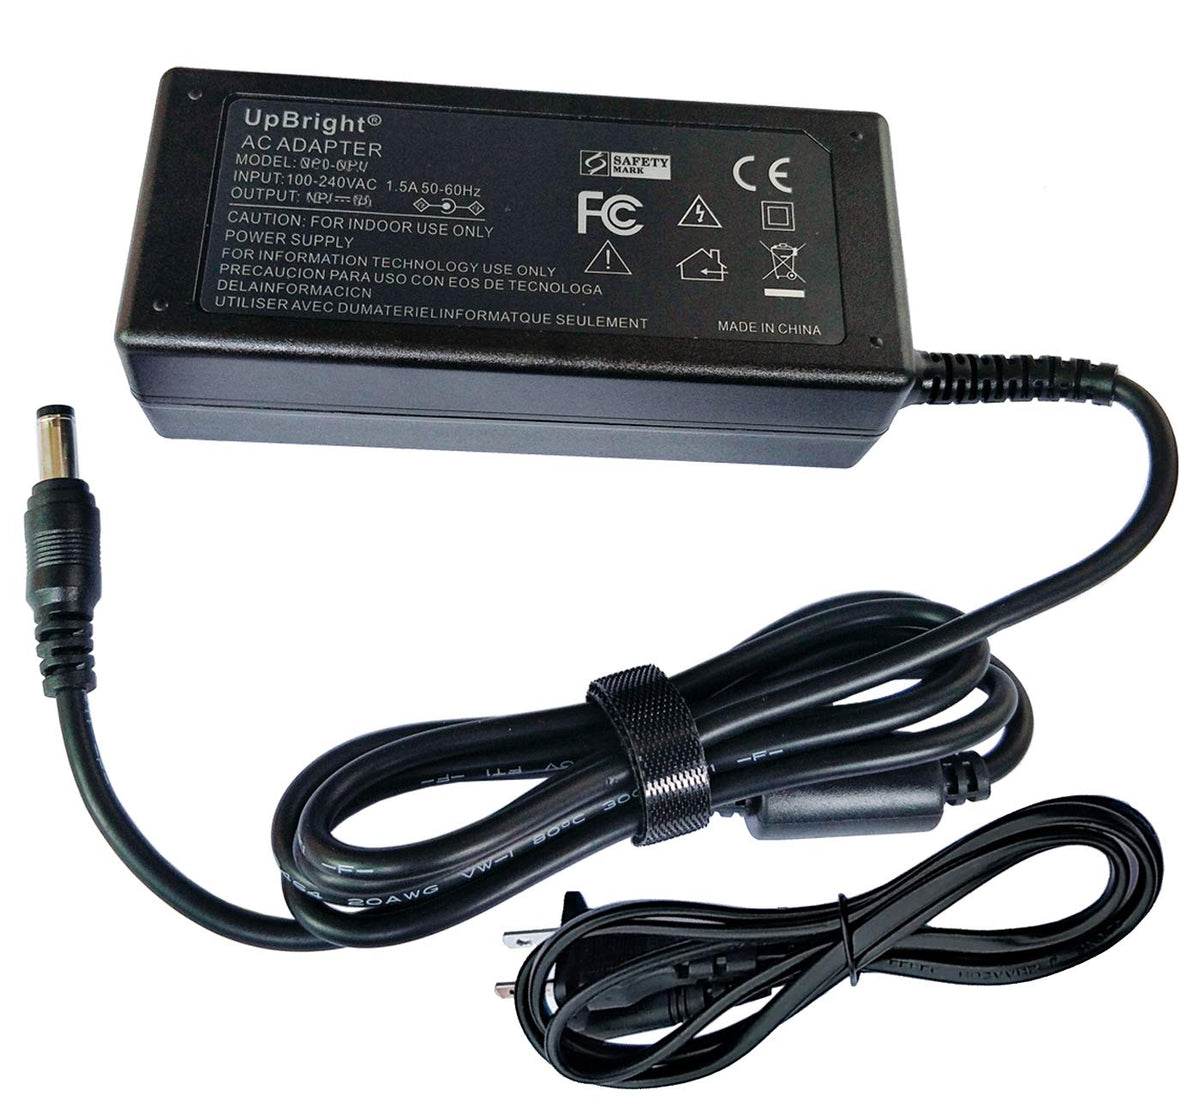 UpBright 12V AC/DC Adapter Compatible with HP Pavilion 2011x 2011xi 2011s LE318AA#A2K 2211x X22LED 2211f D5061A F1910A F1503 f1703 PE1229 P9620A F1504 PE1235 PE1245 x2301 XP598A LED LCD Monitor Power